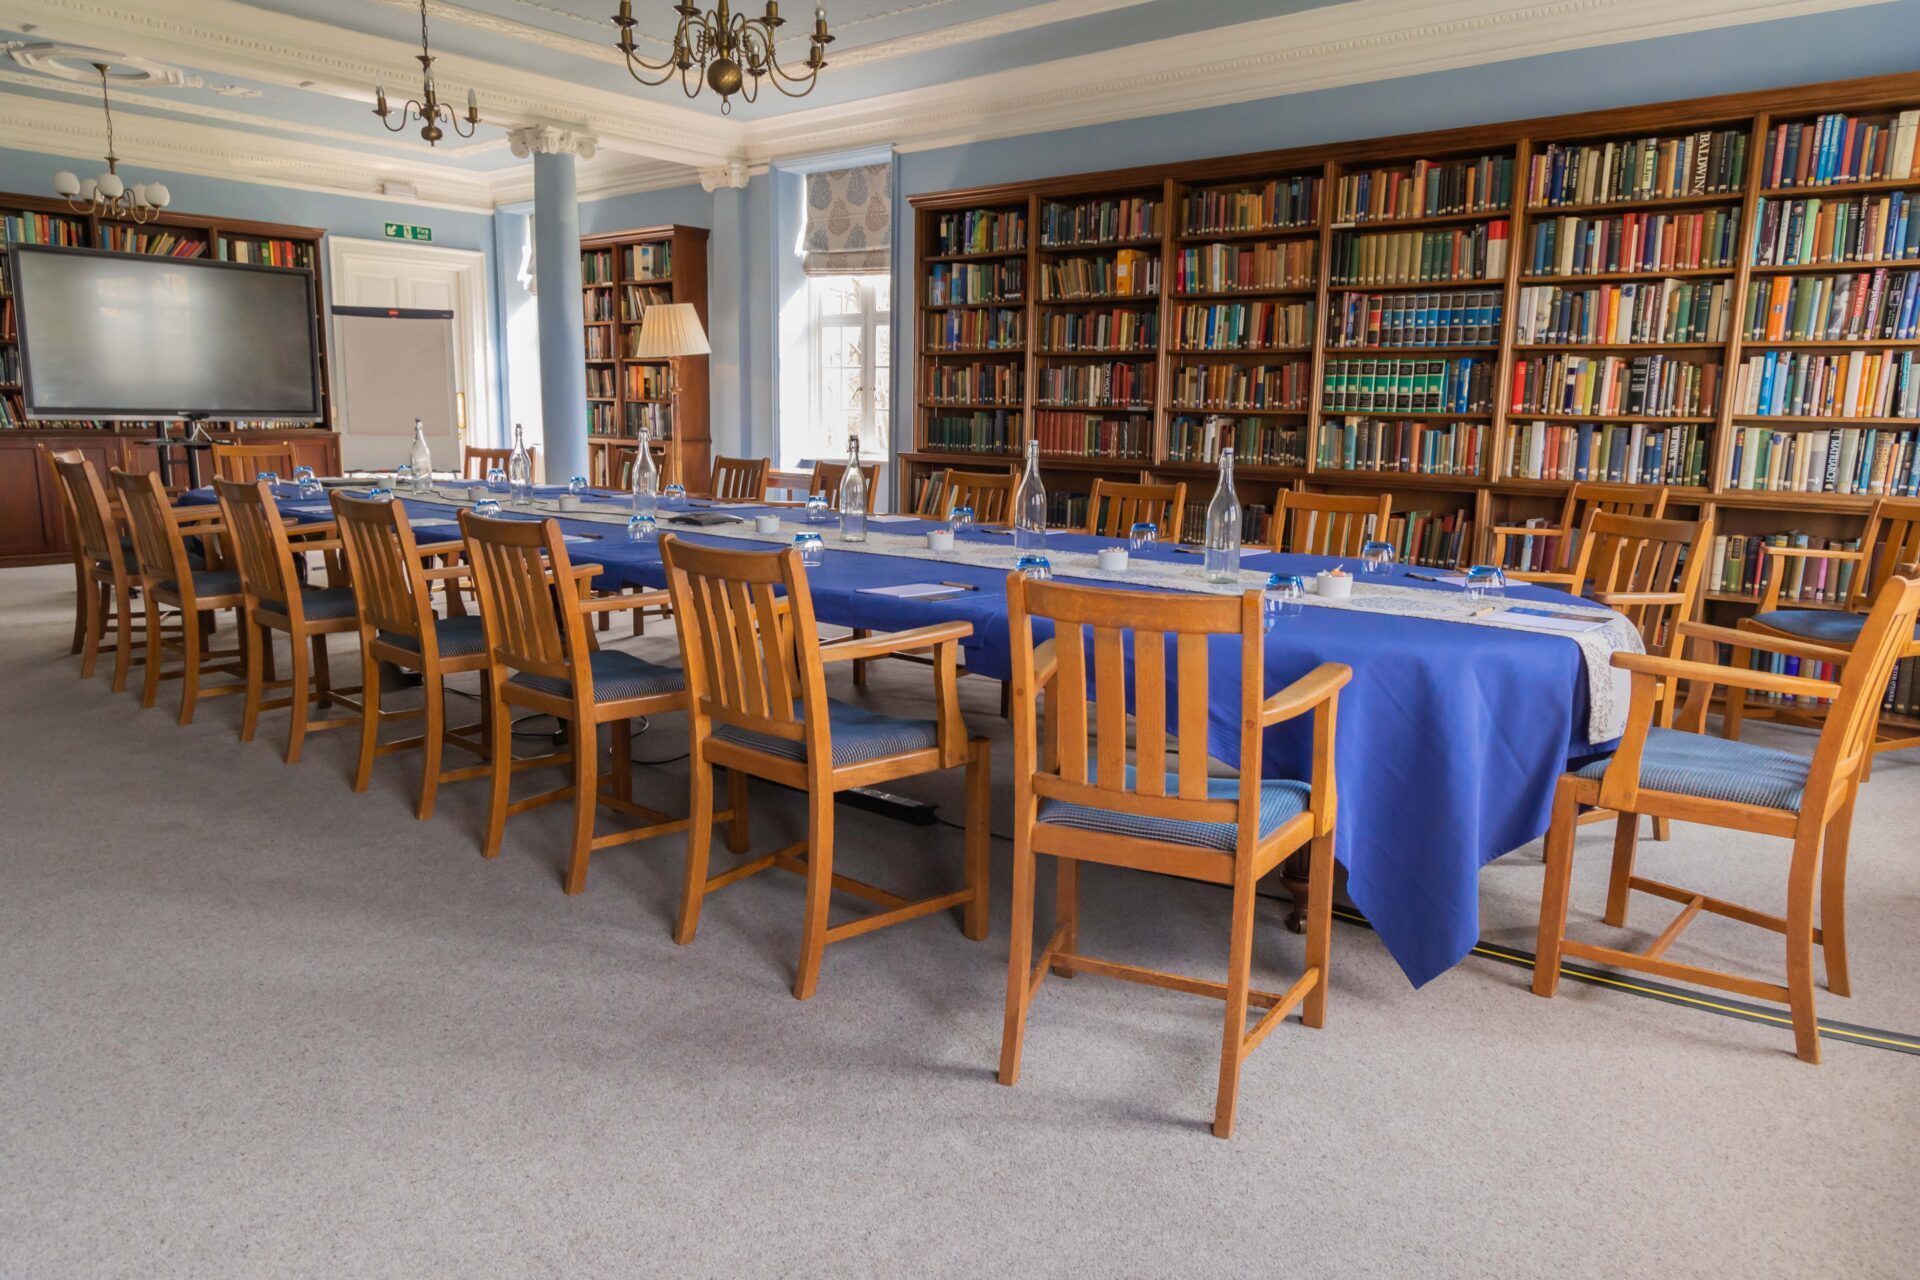 The Amy Buller Library in Cumberland Lodge, set up to accommodate 20 guests